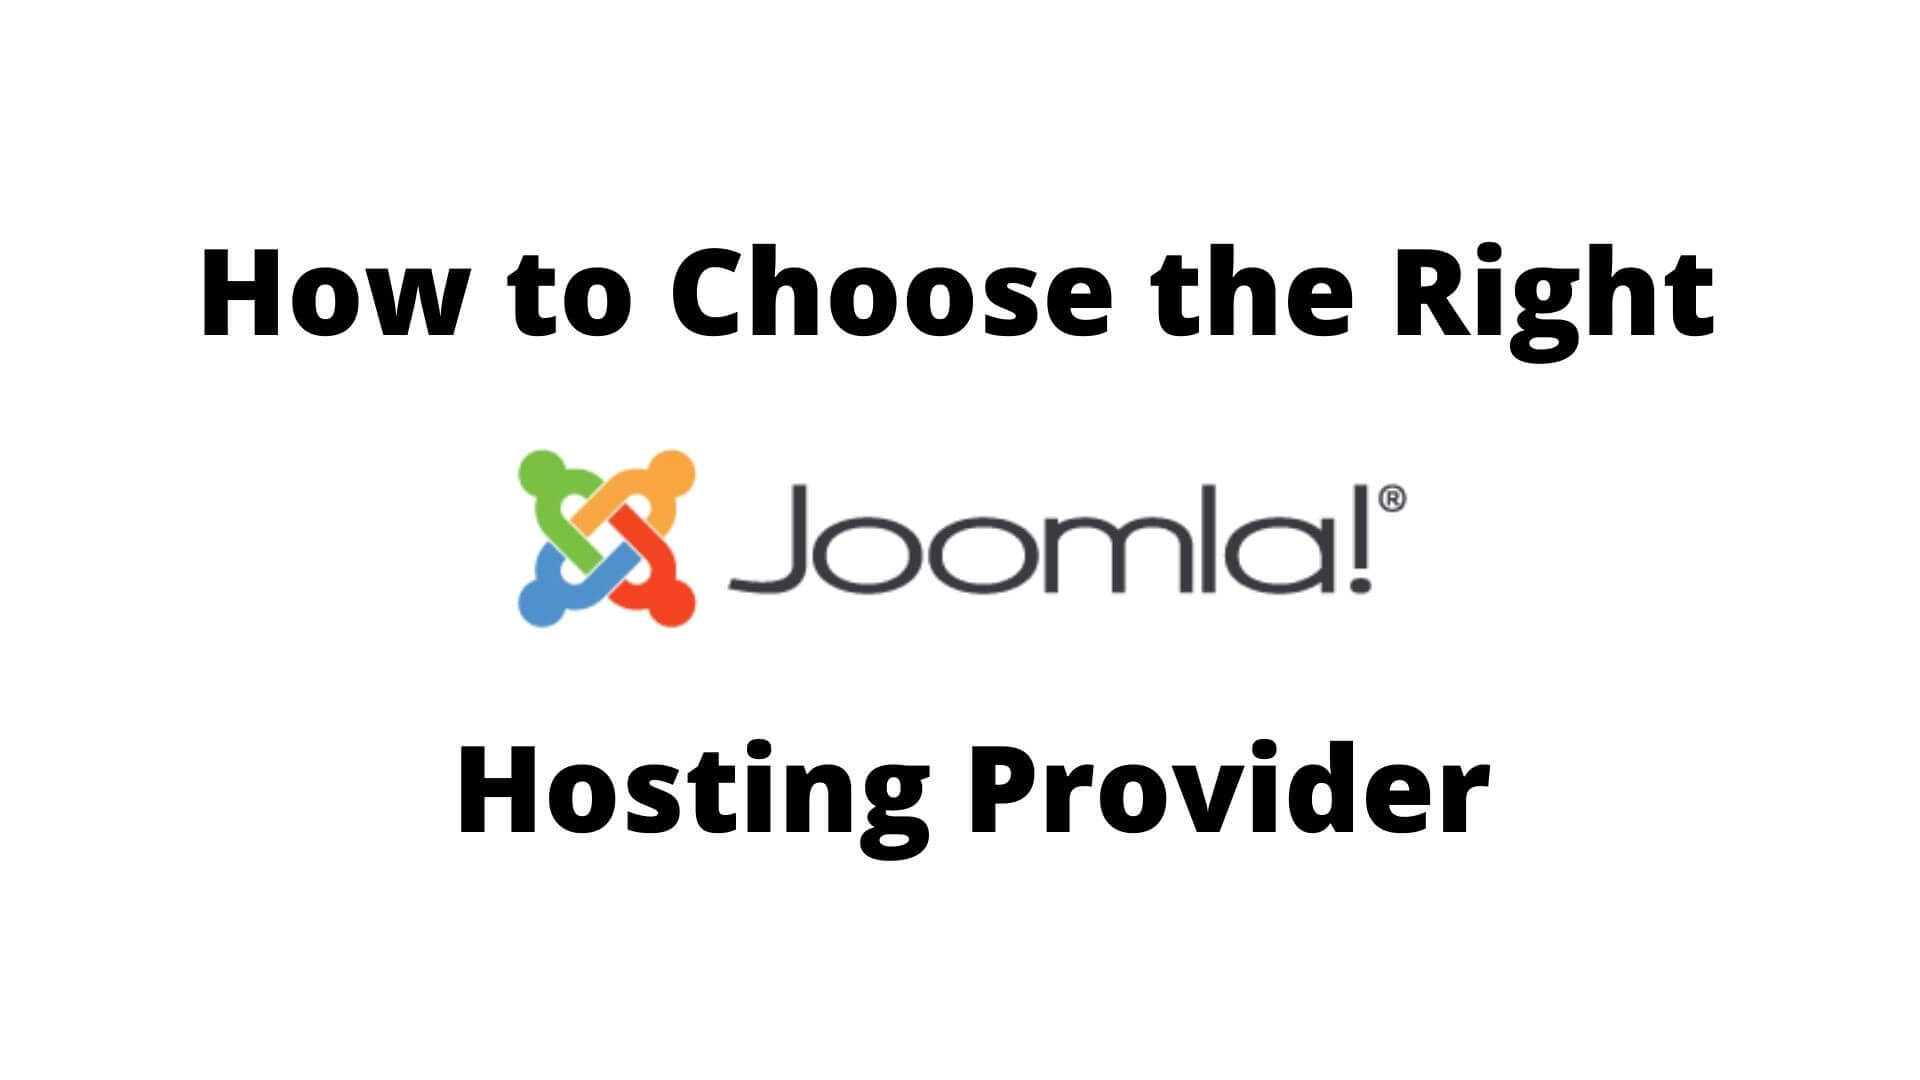 How-to-Choose-the-Right-Joomla-Hosting-Provider-1